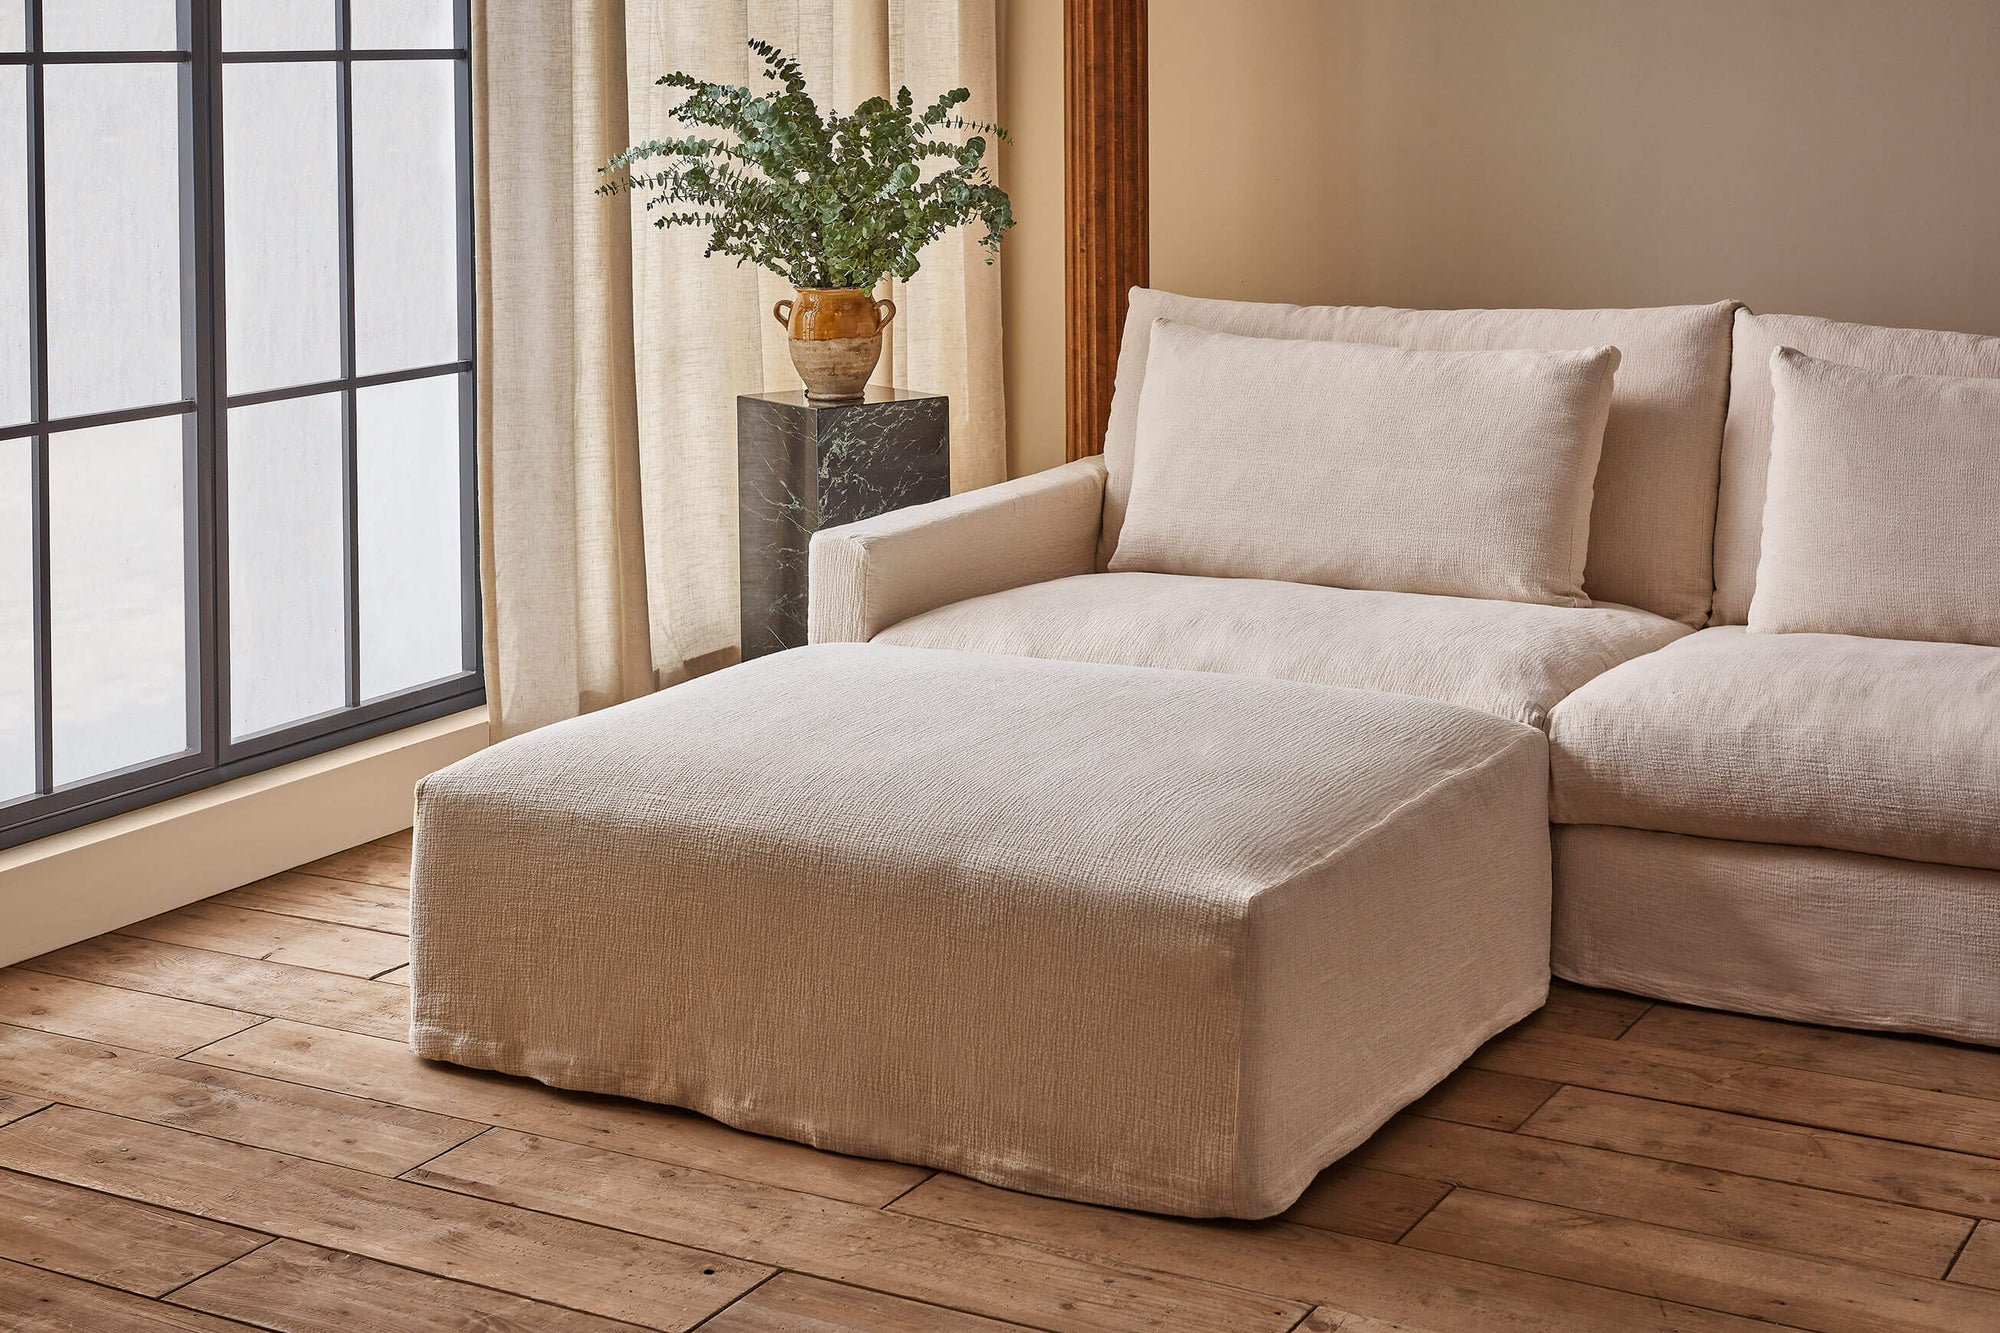 Devyn Sectional Ottoman in Corn Silk, a light beige Washed Cotton Linen, placed in front of a Devyn Sectional Sofa next to a large window and a plant on a stone pedestal